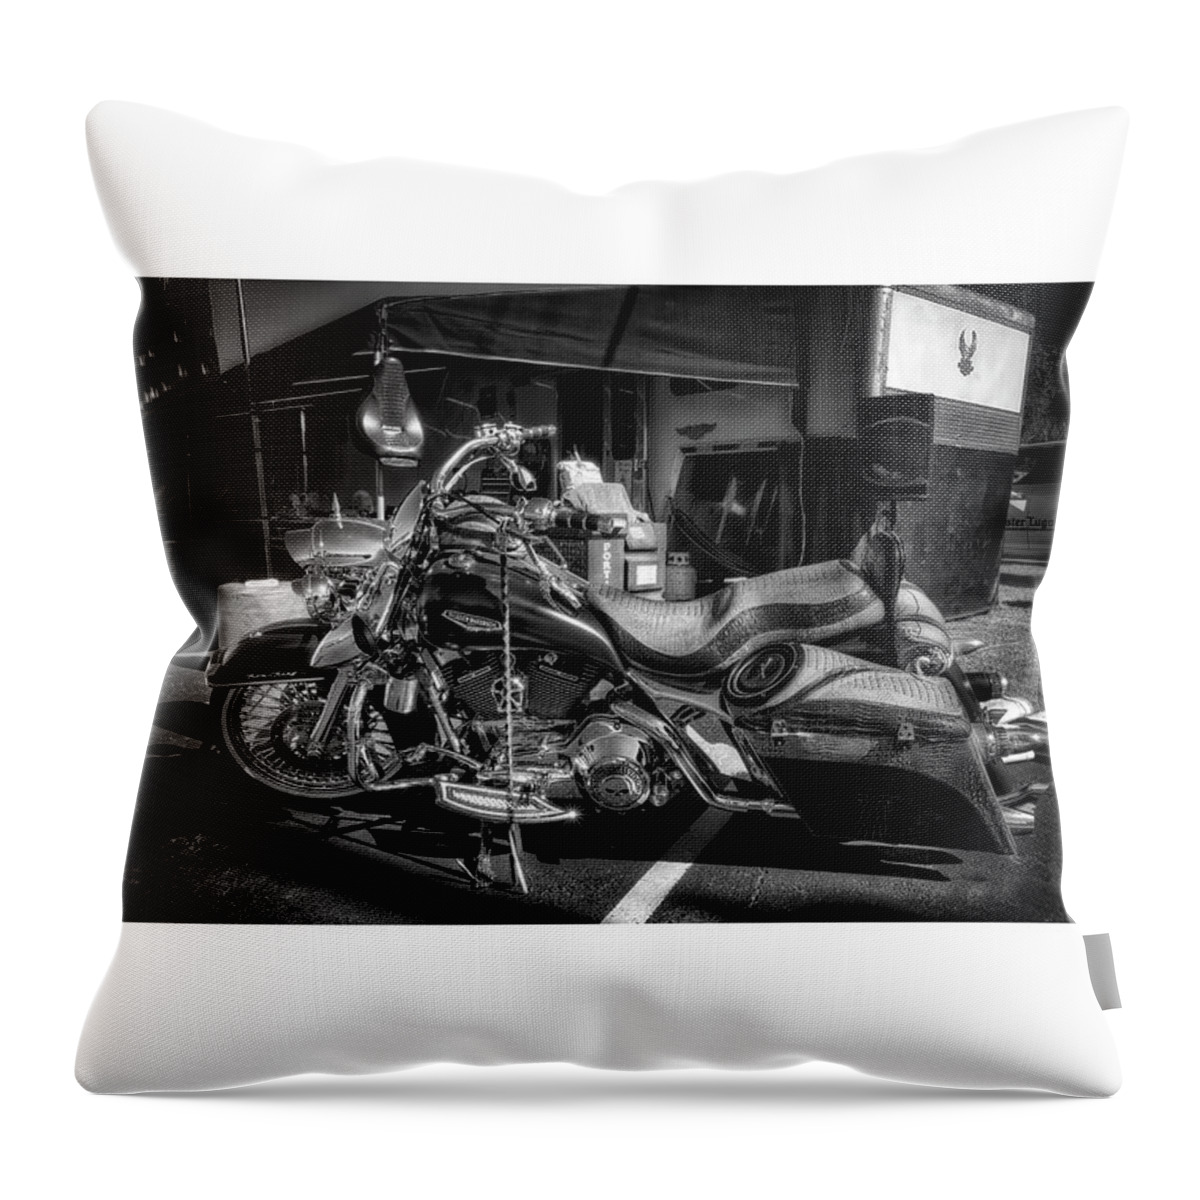 Black&white Throw Pillow featuring the photograph Road King 2 by ARTtography by David Bruce Kawchak